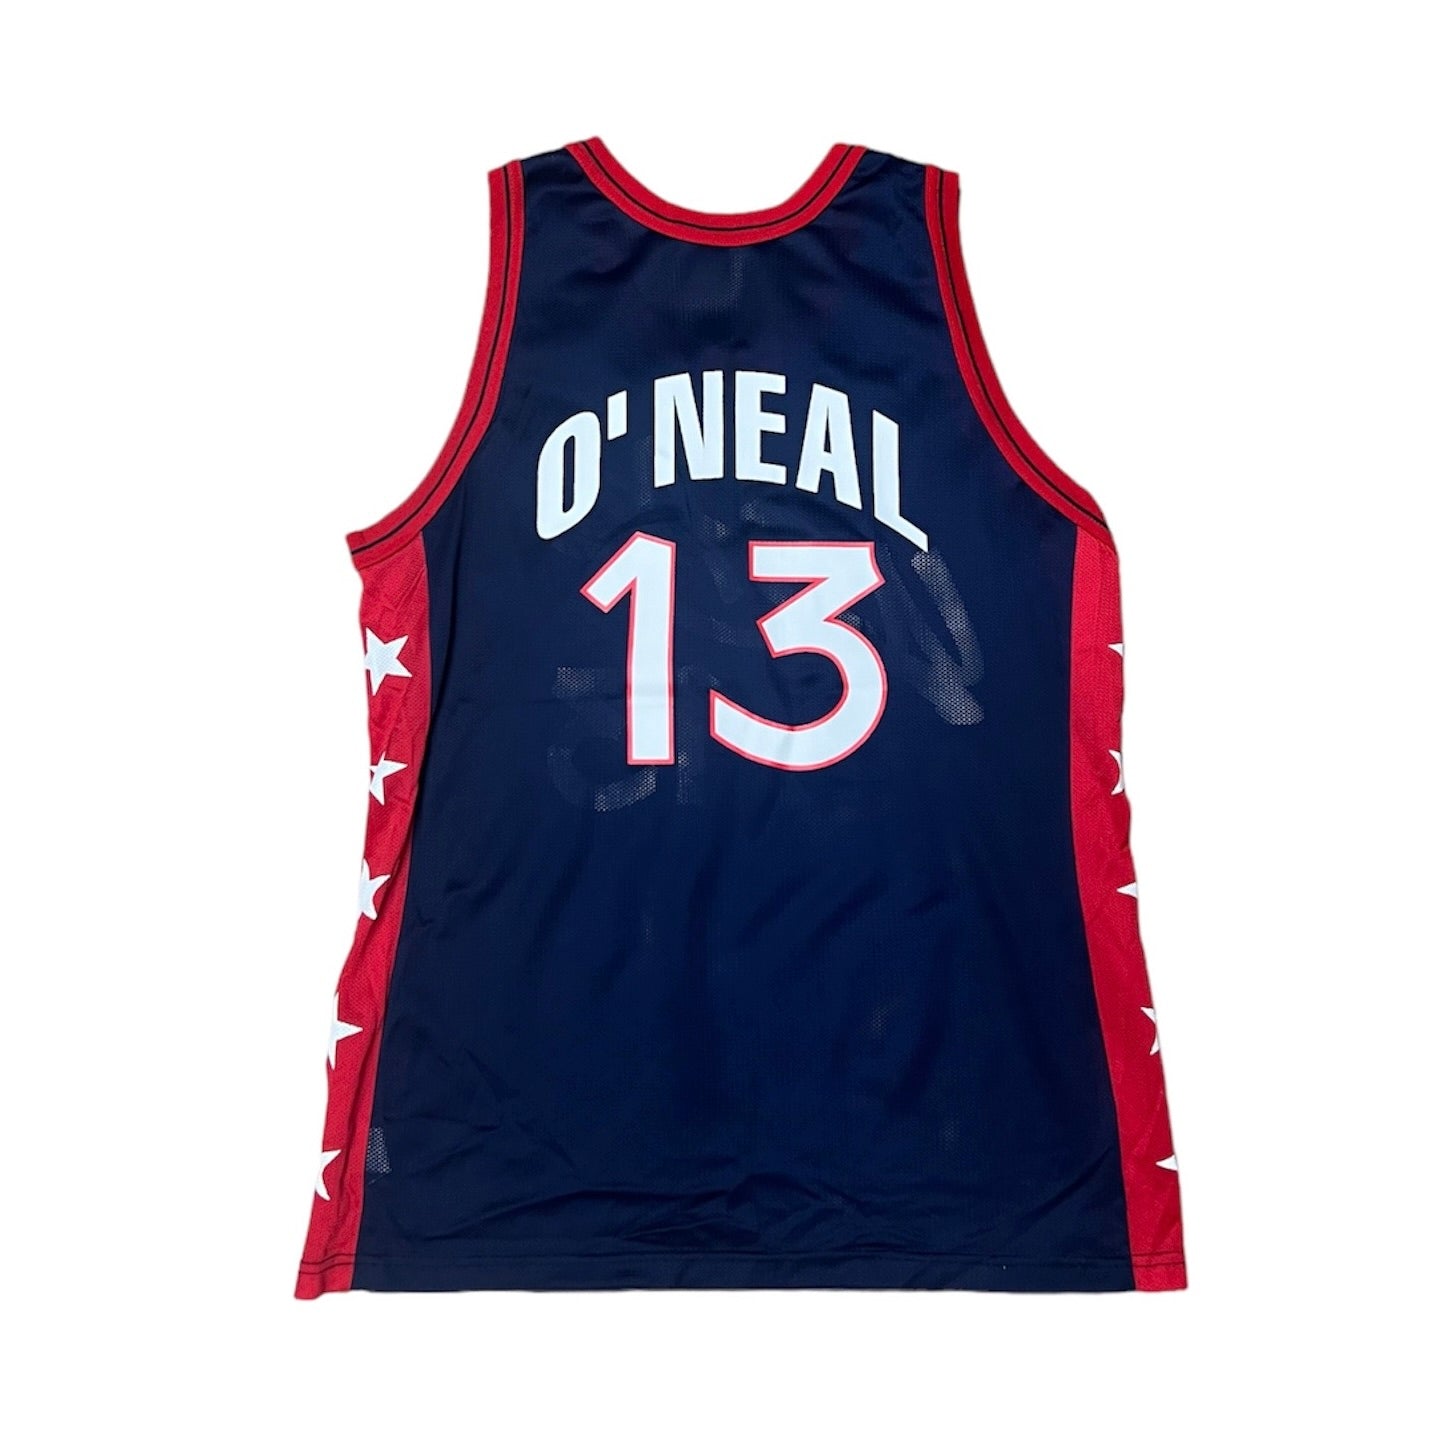 Champion USA National Team Shaquille O'Neal Basketball Jersey